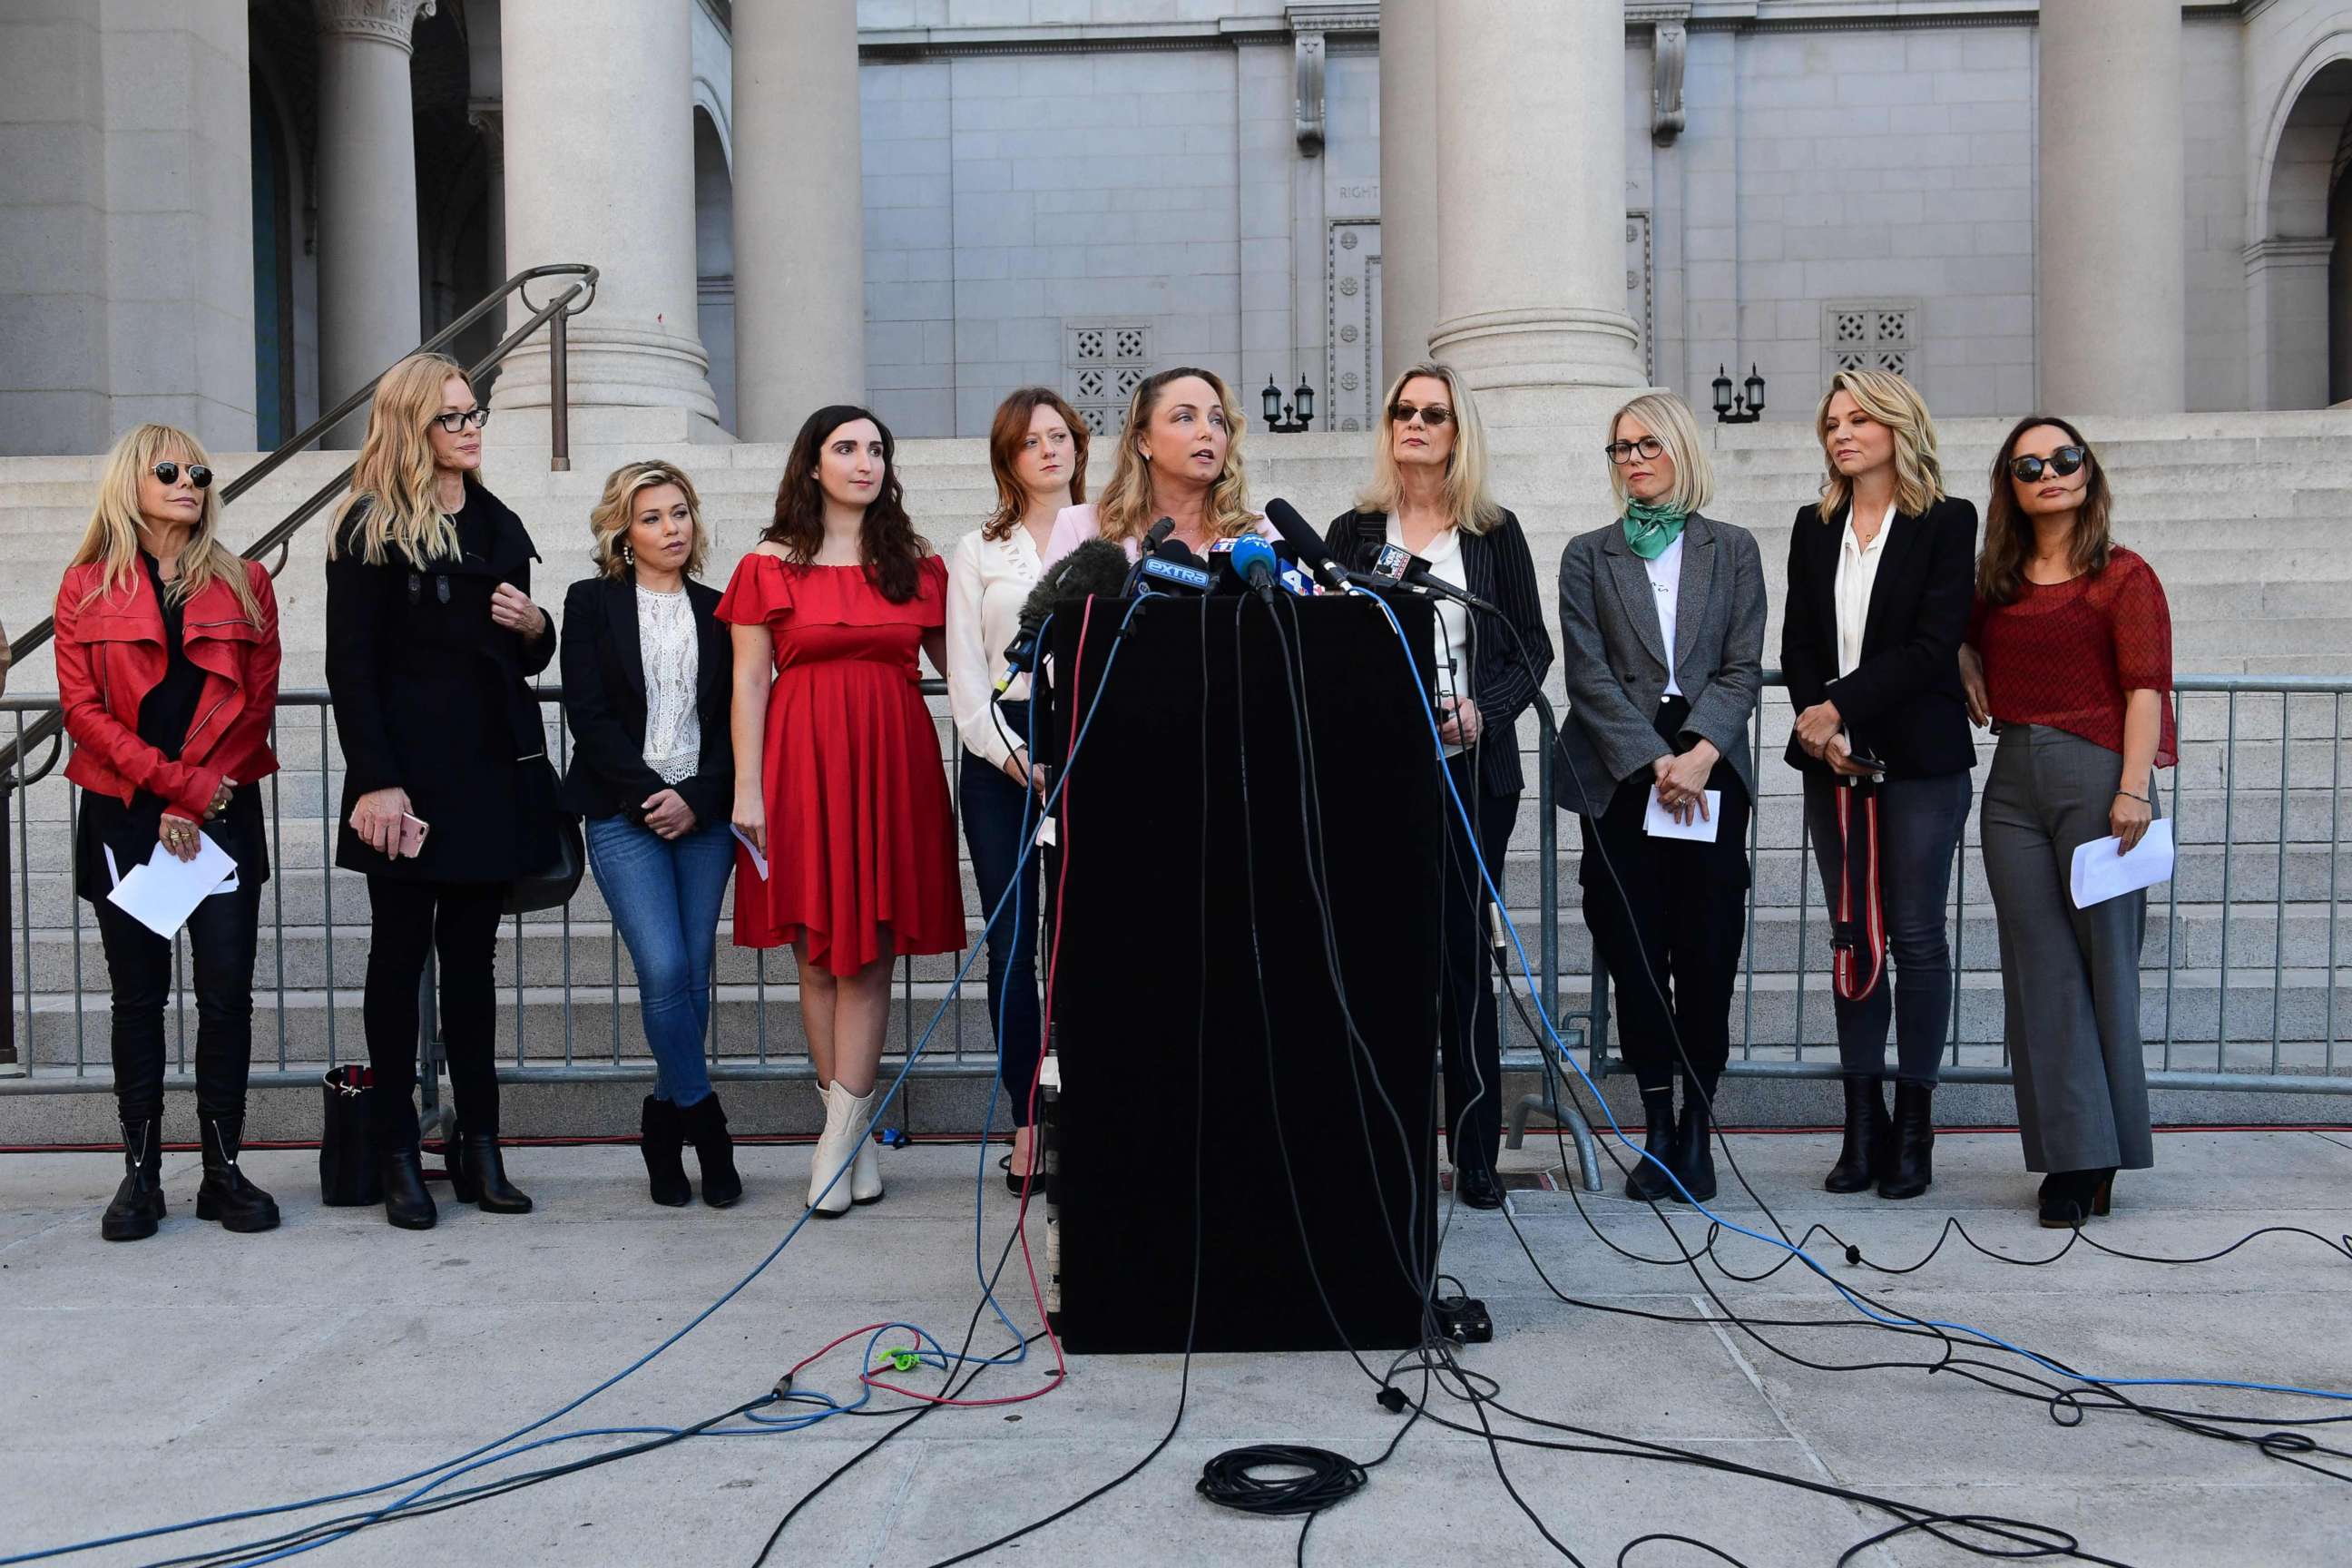 PHOTO: Louisette Geiss speaks alongside a group of Silence Breakers about Harvey Weinsteins sexual misconduct, during a press conference following Weinstein's guilty verdict on Feb. 25, 2020, in Los Angeles.